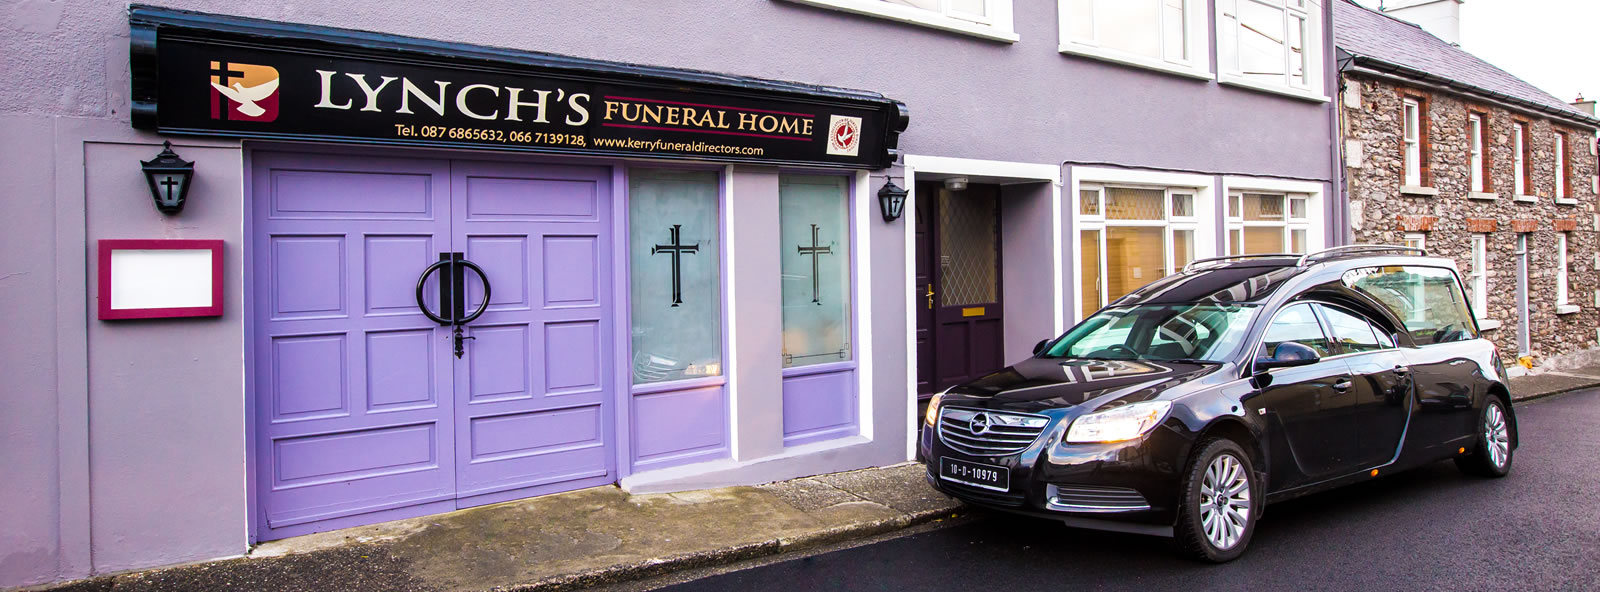 Lynch's Funeral Home Castlegregory